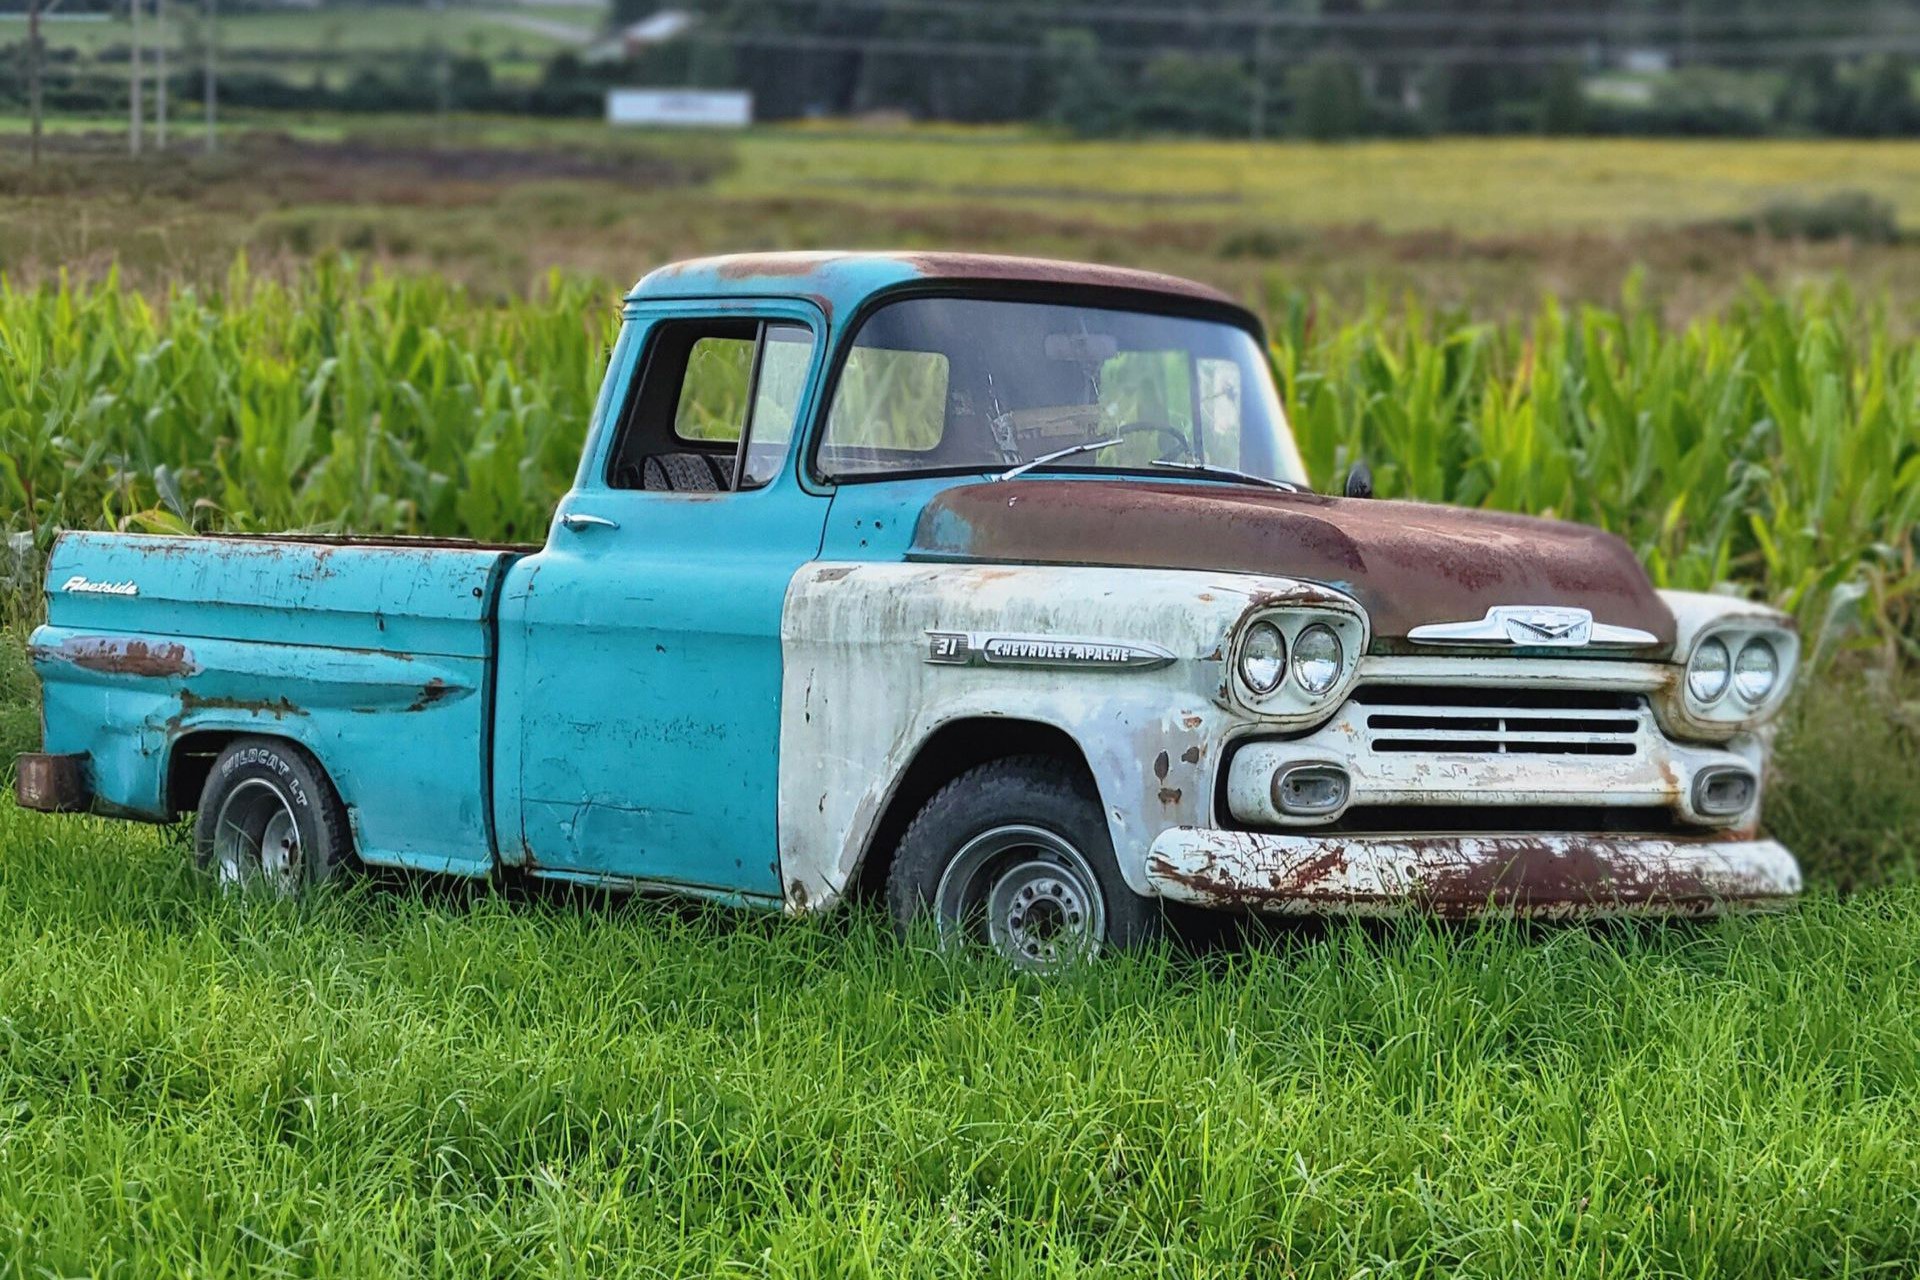 Is this 454-Powered 1958 Chevrolet Apache Your Kind of Sleeper?